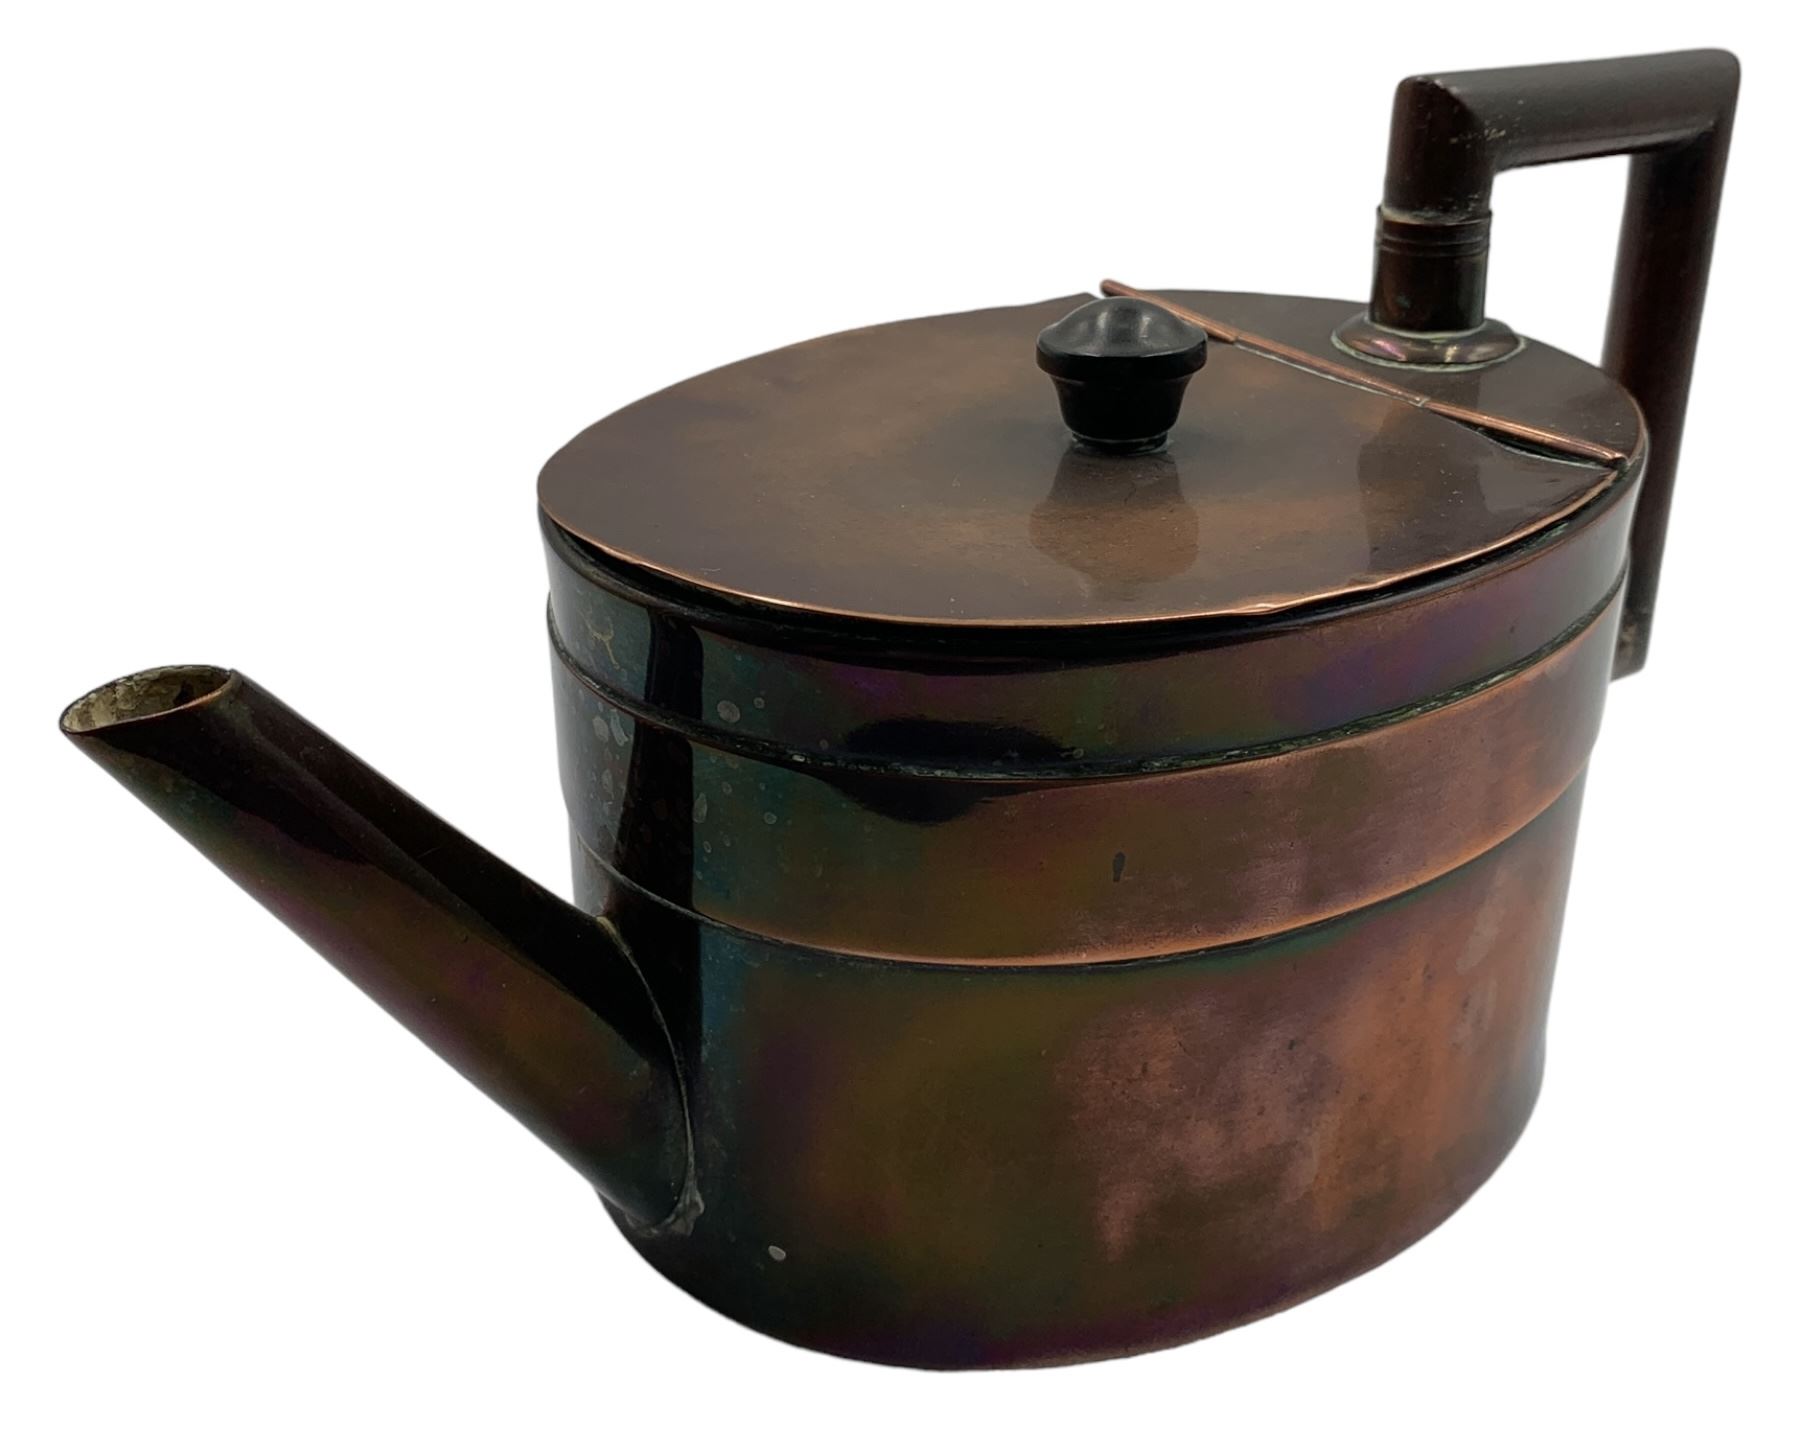 Christopher Dresser (1834-1904): Victorian copper teapot of oval cylincrical form with stylized spou - Image 2 of 4